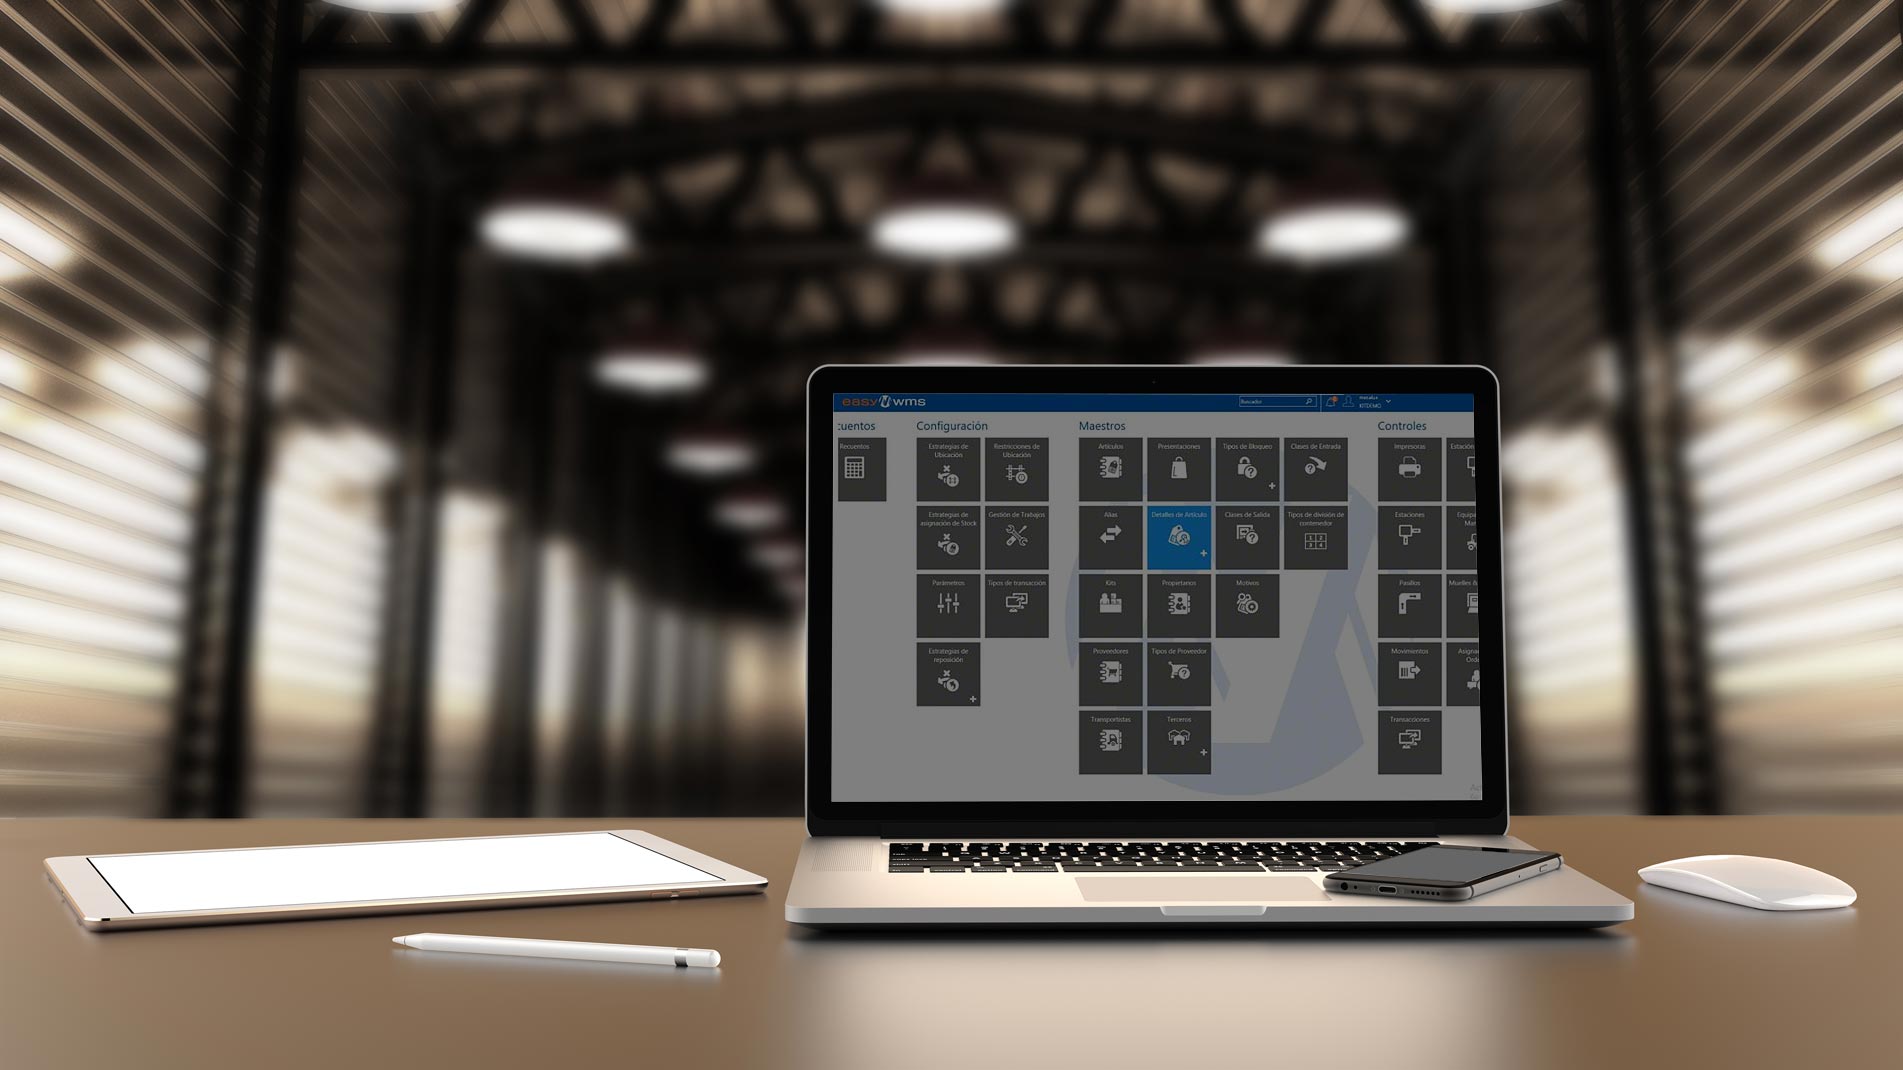 inventory management software for mac free